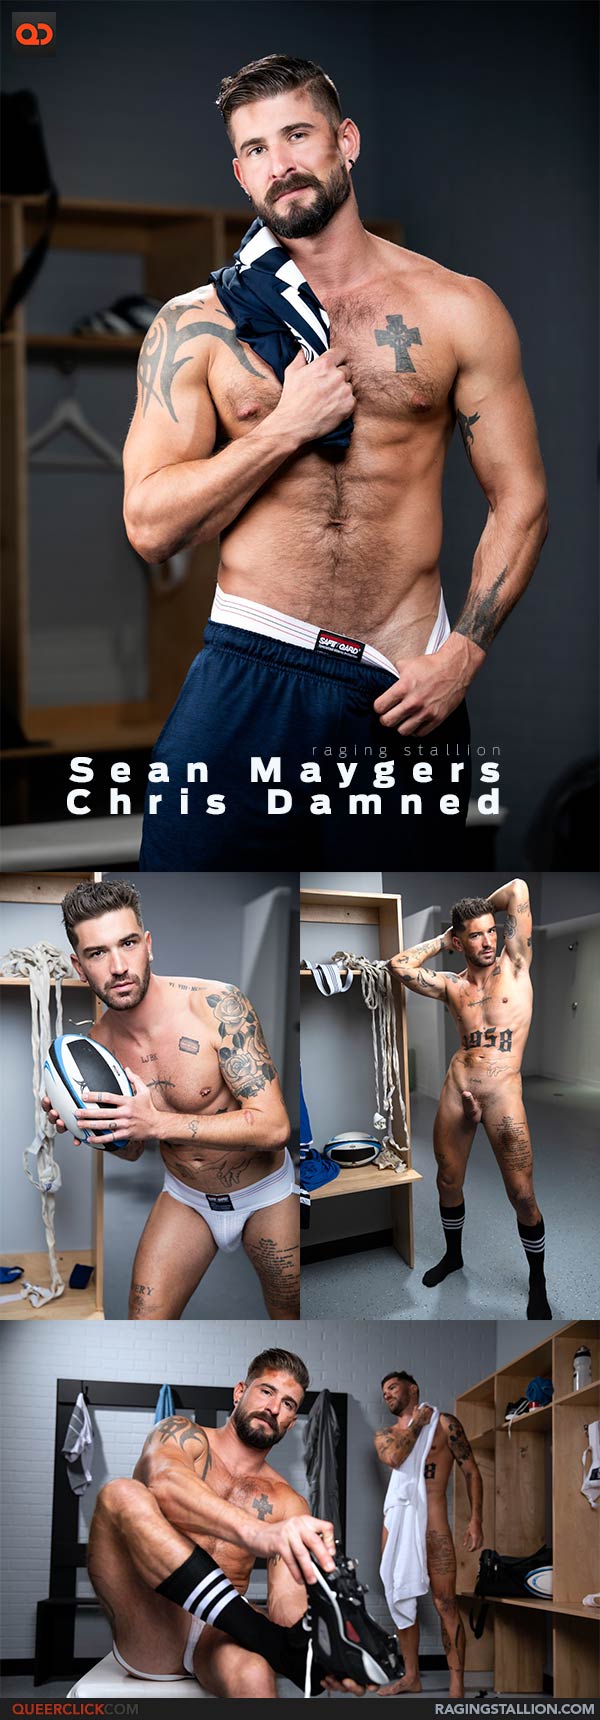 Raging Stallion: Sean Maygers and Chris Damned